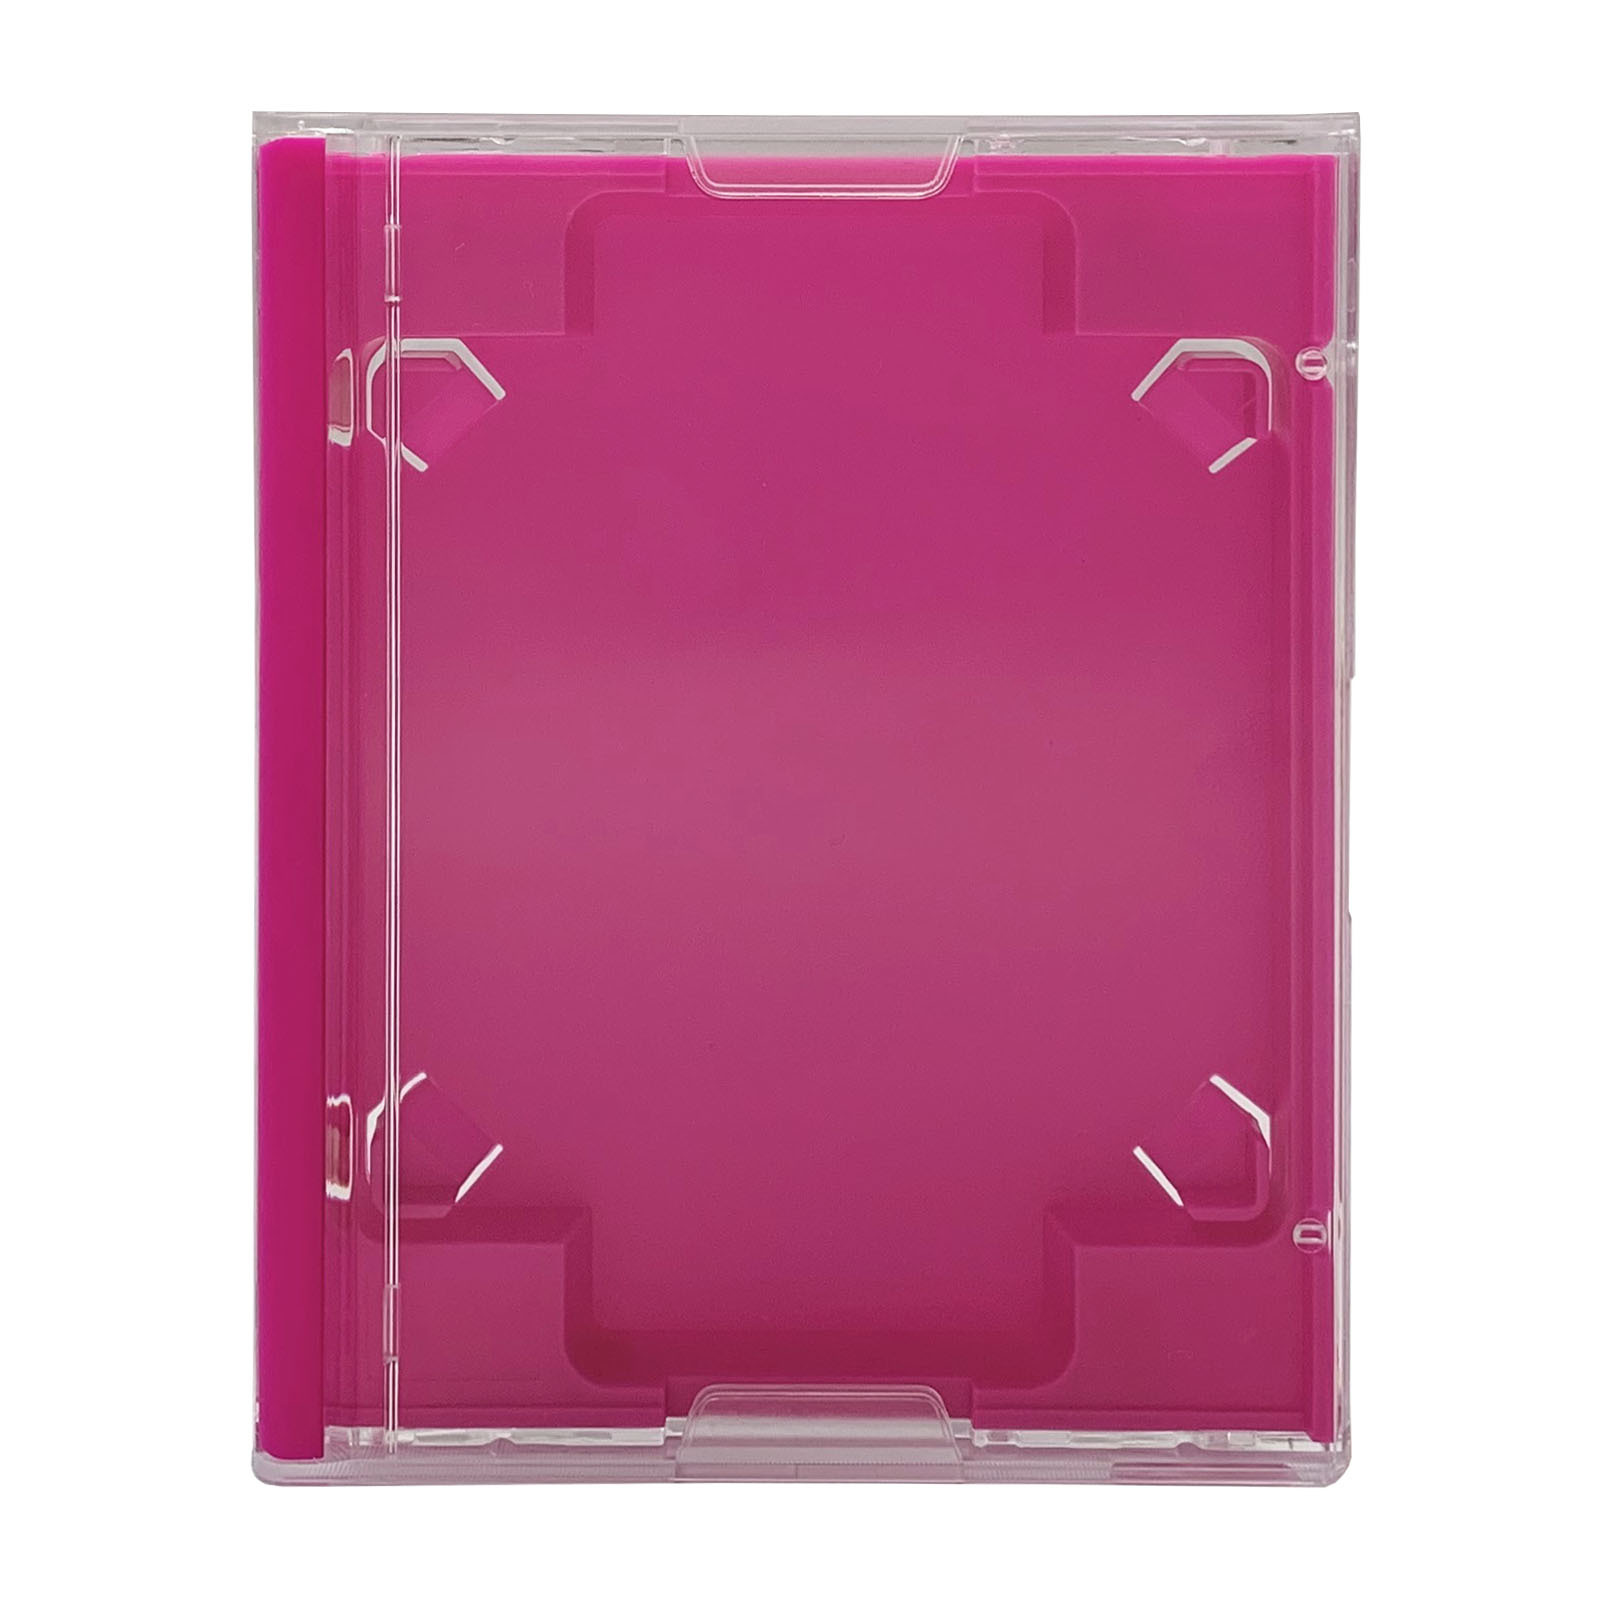 Full size MiniDisc case with a pink inner tray - Retro Style Media